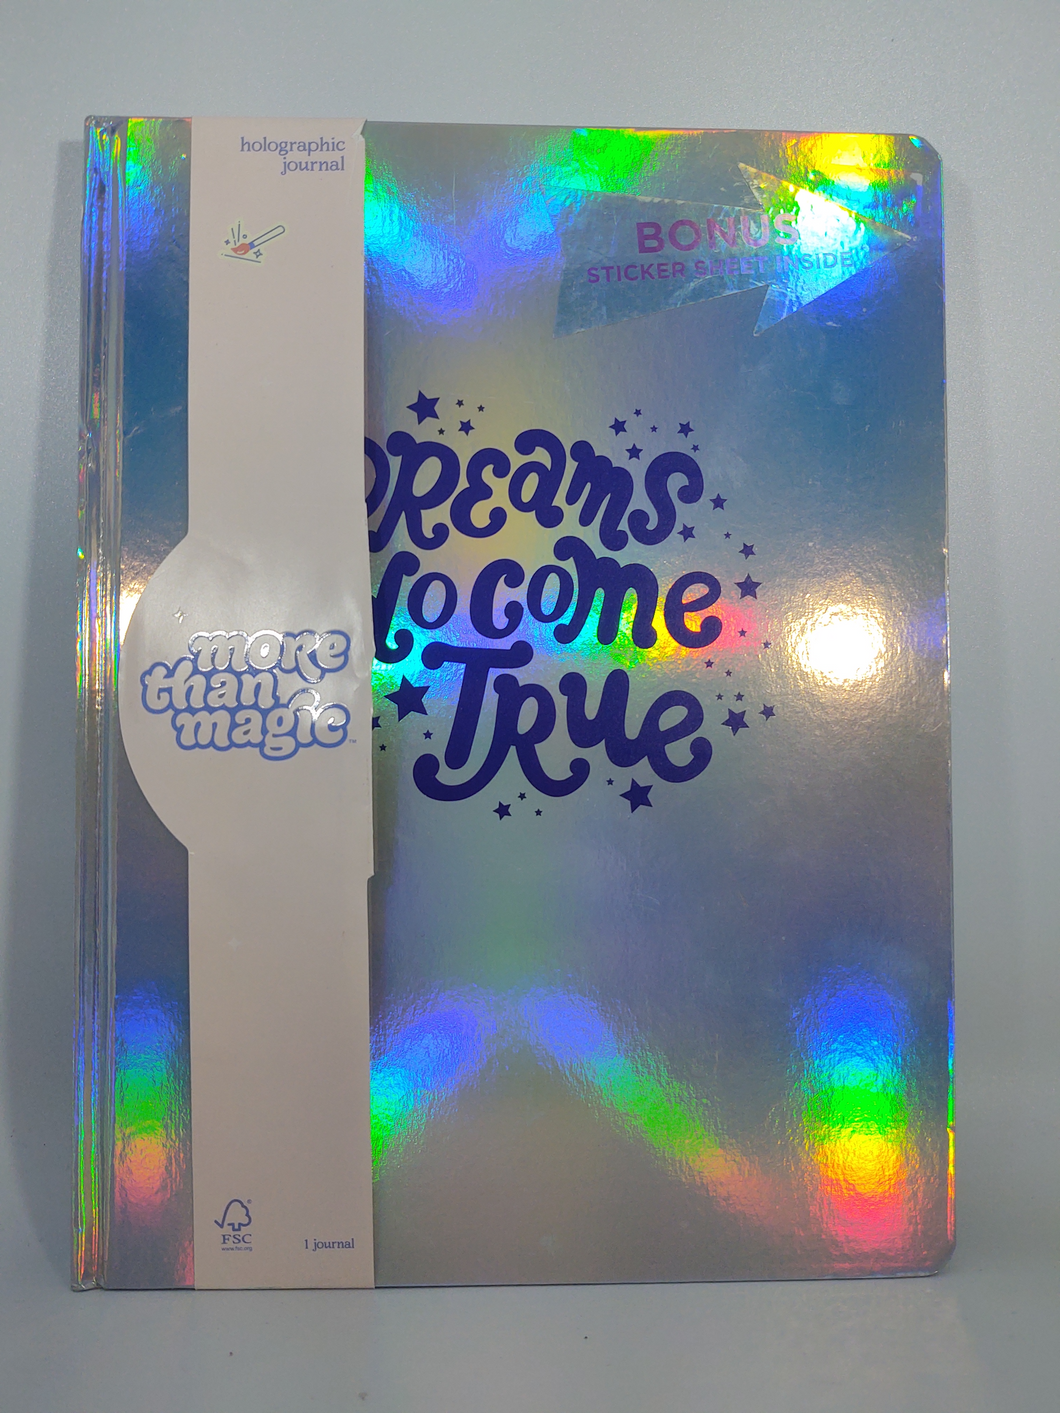 Holographic Journal - 